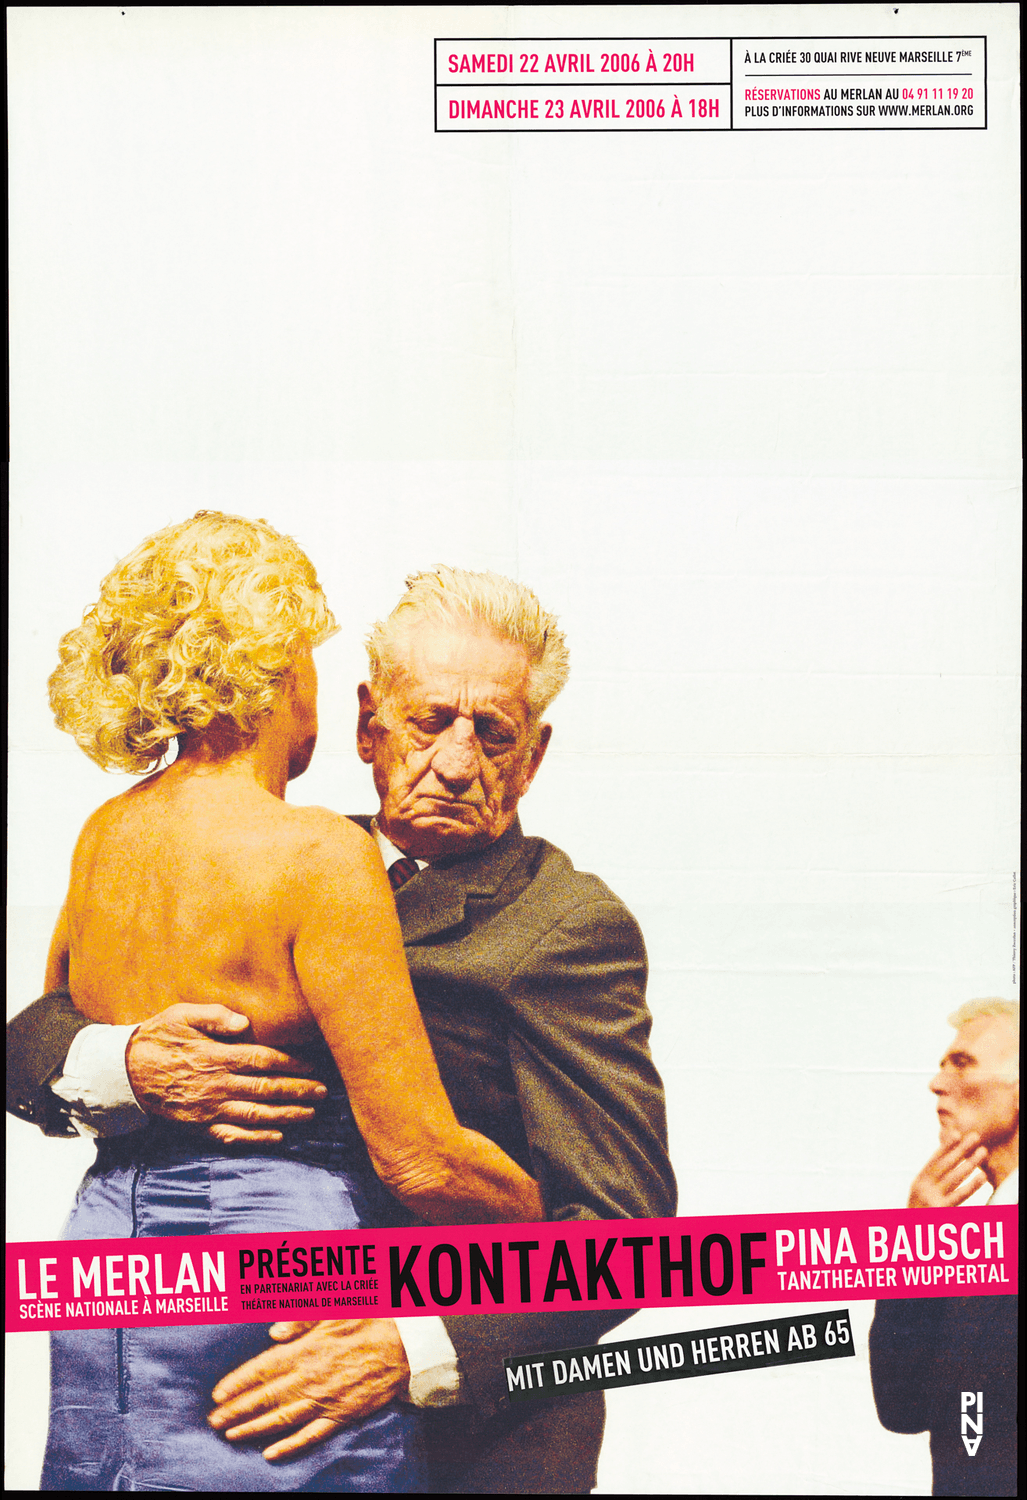 Poster for “Kontakthof. With Ladies and Gentlemen over 65” by Pina Bausch in Marseille, 04/22/2006 – 04/23/2006